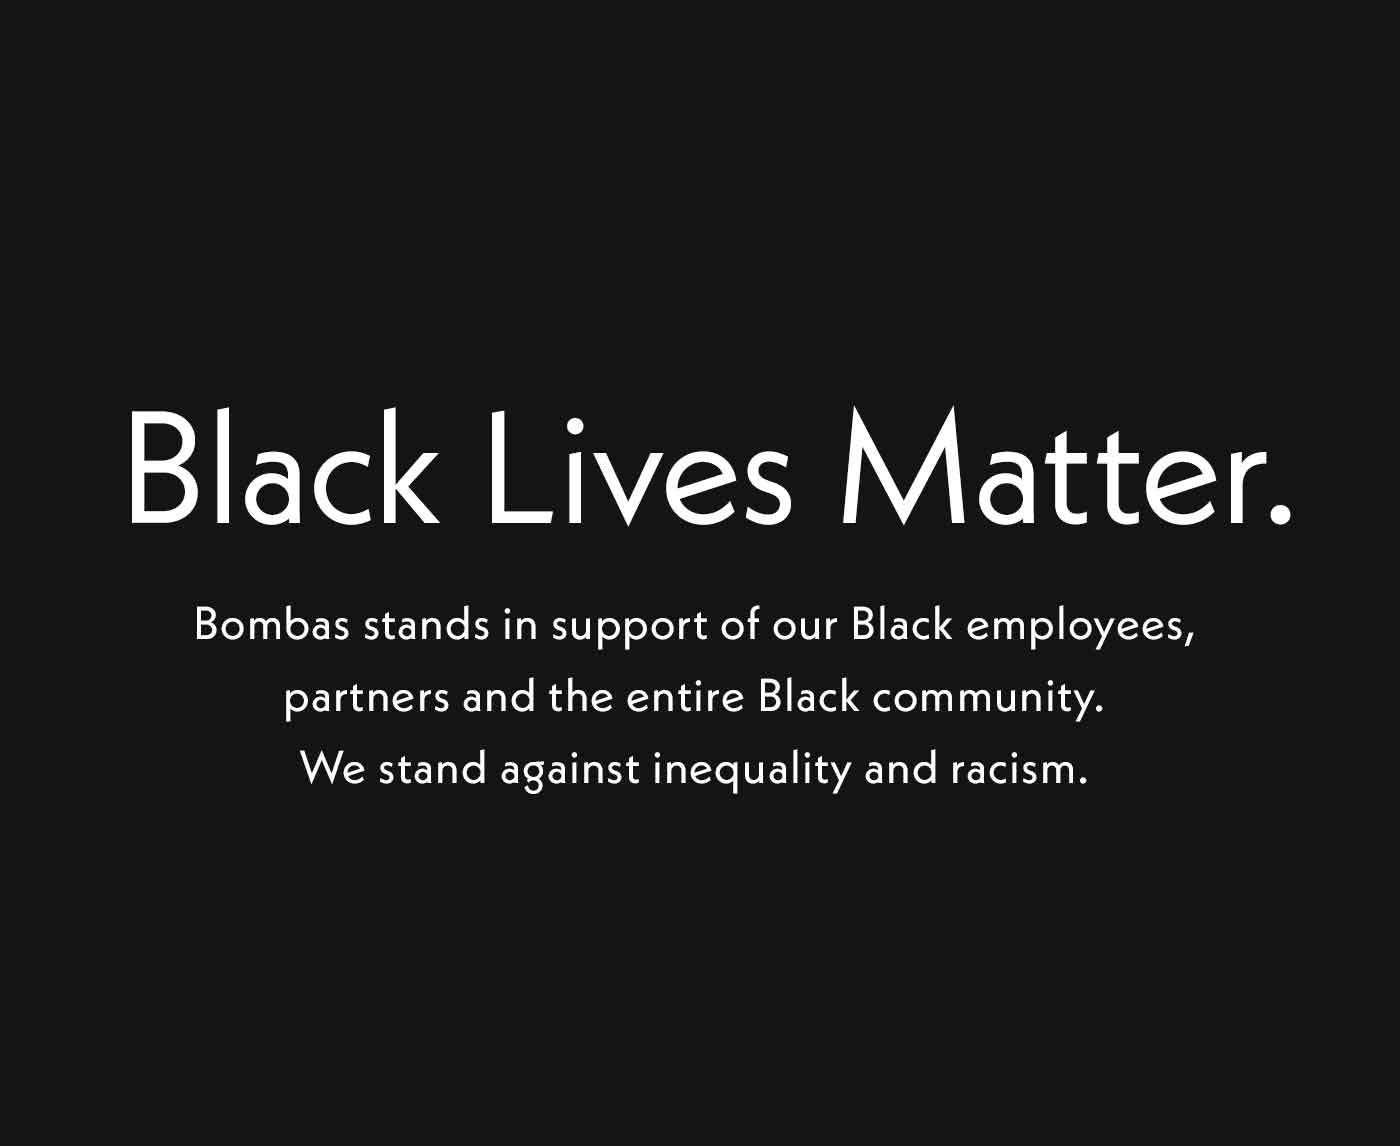 Black Lives Matter. Bombas stands in support of our Black employees, partners and the entire Black community. We stand against inequality and racism.